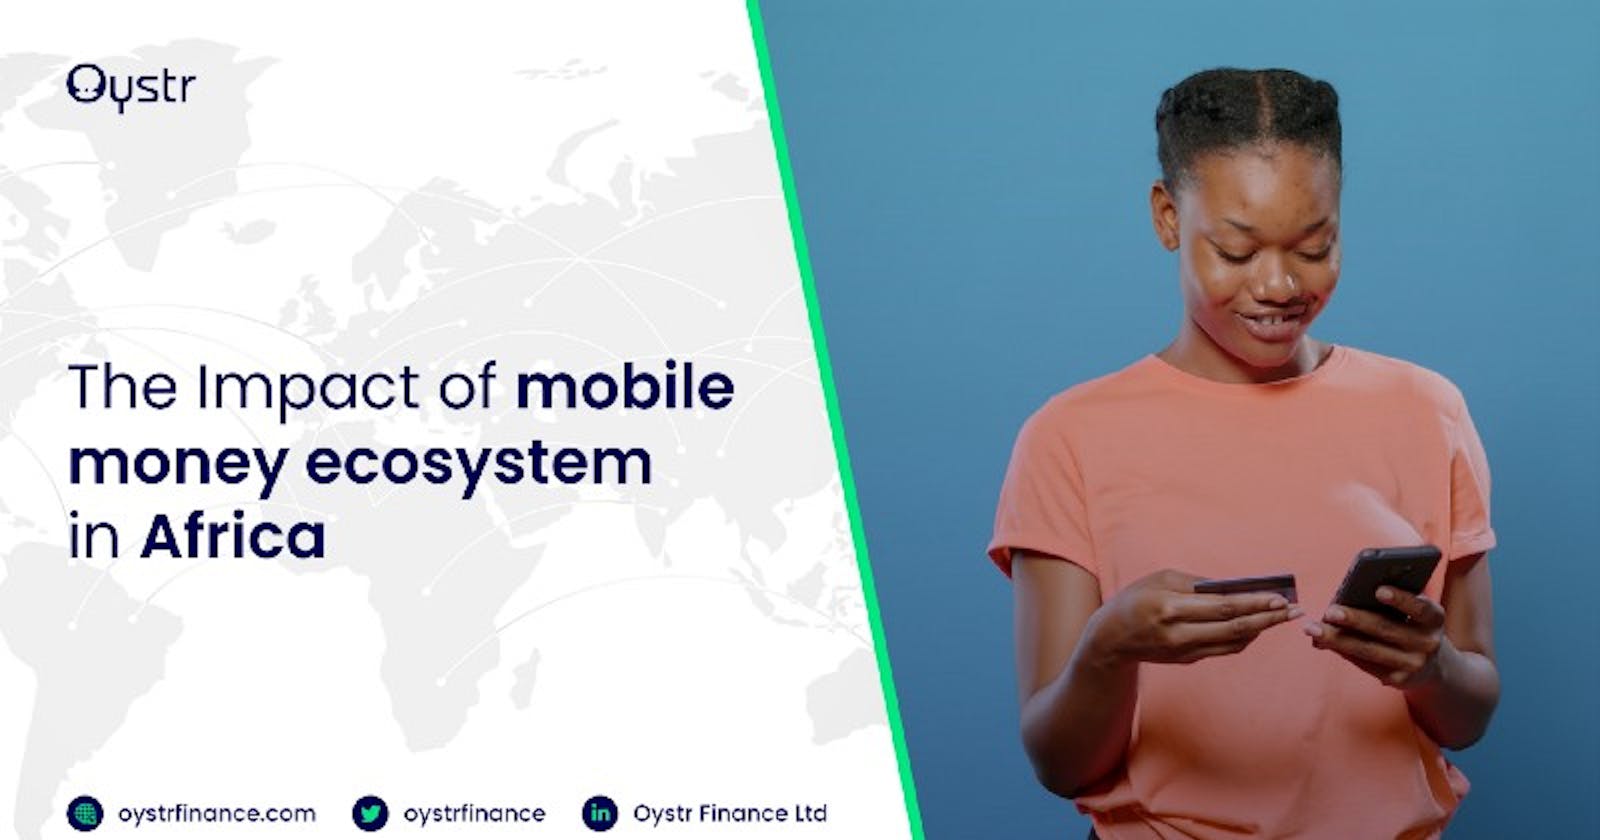 The Impact of Mobile Money Ecosystem in Africa